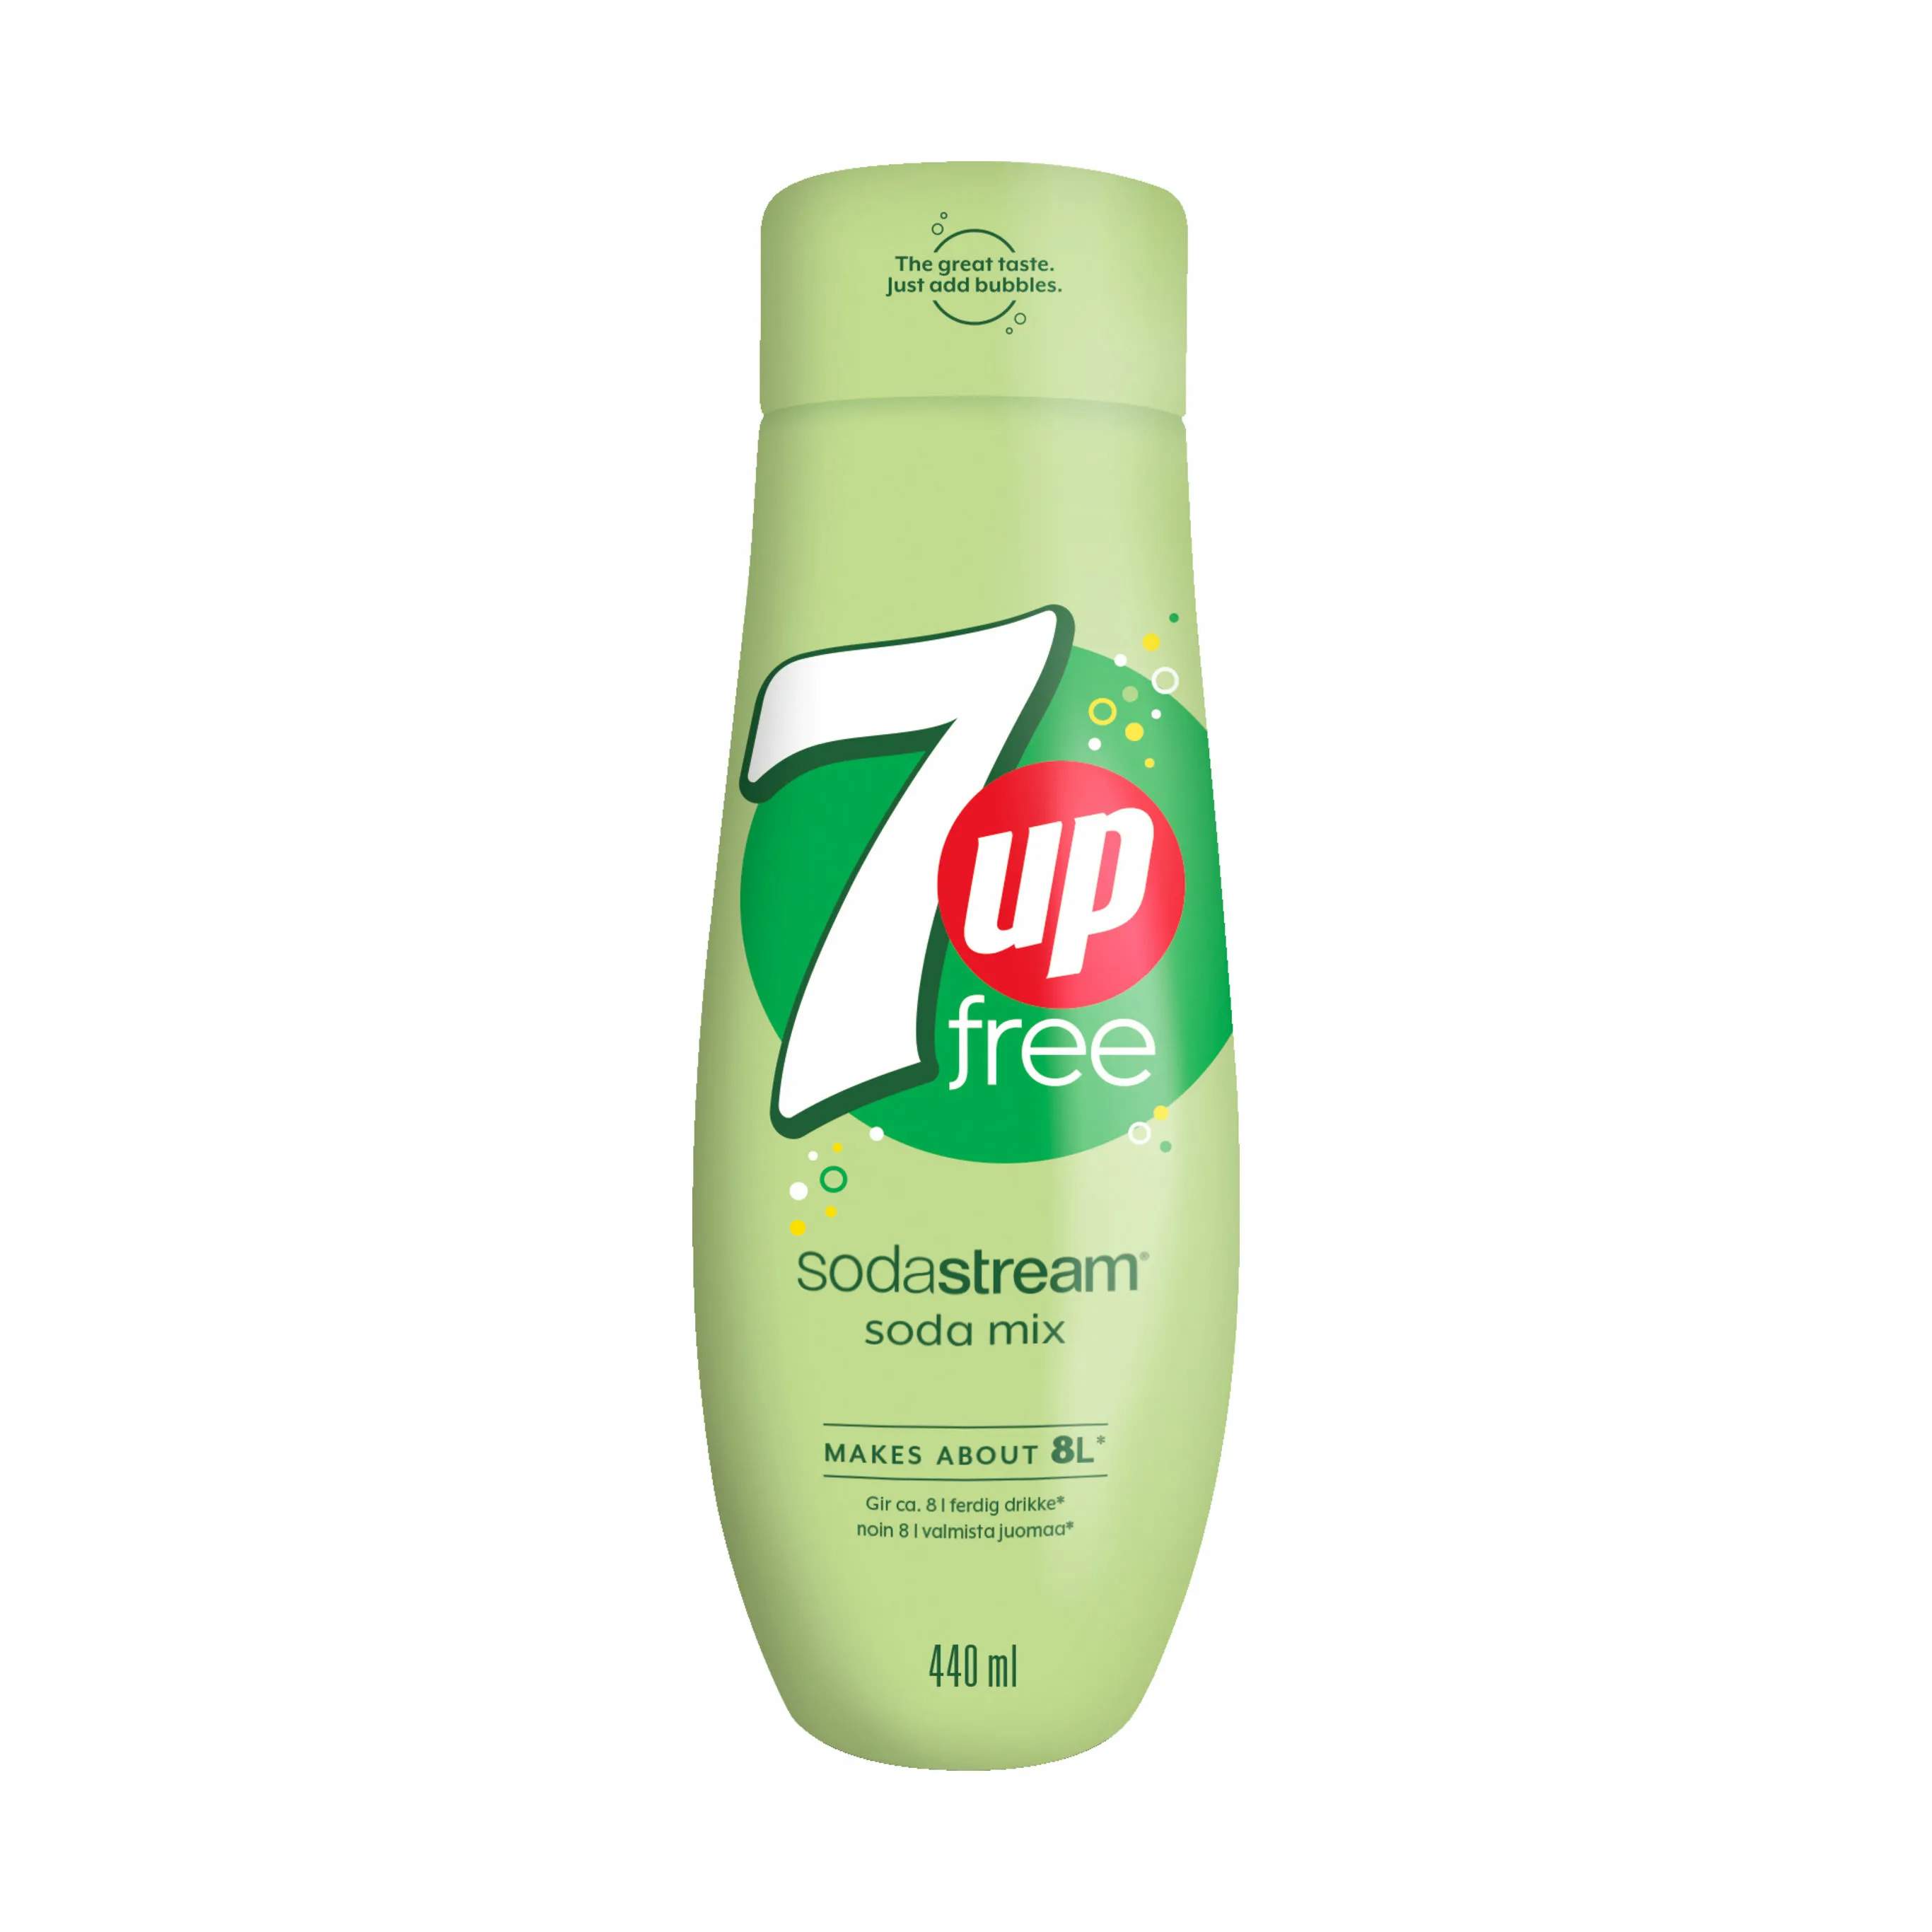 SodaStream smagskoncentrater Sirup - 7up Free